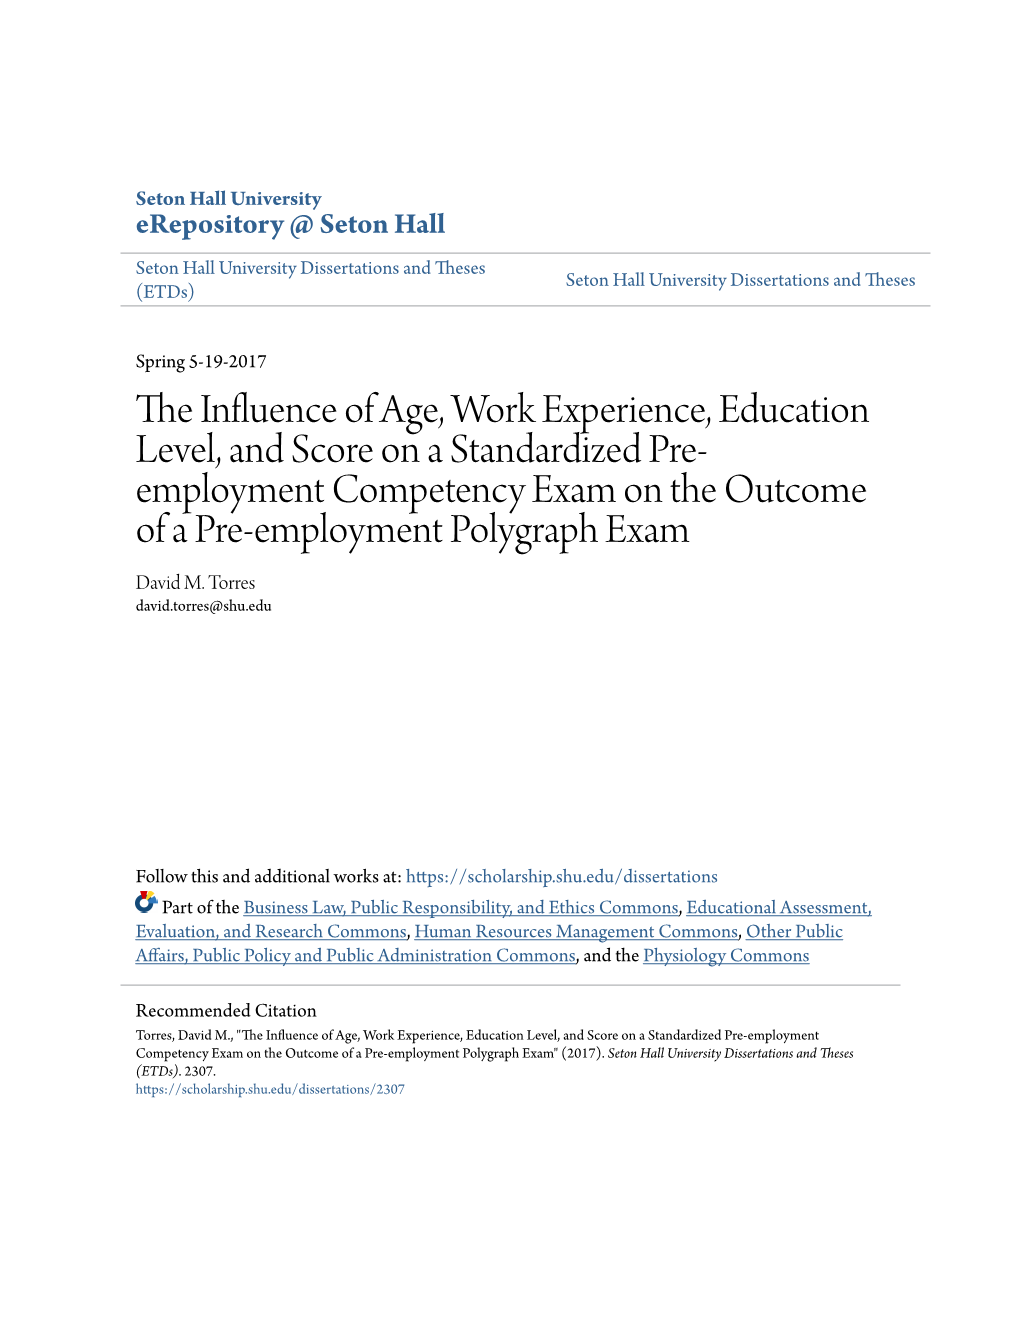 The Influence of Age, Work Experience, Education Level, and Score on a Standardized Pre-Employment Competency Exam on the Outcome of a Pre-Employment Polygraph Exam